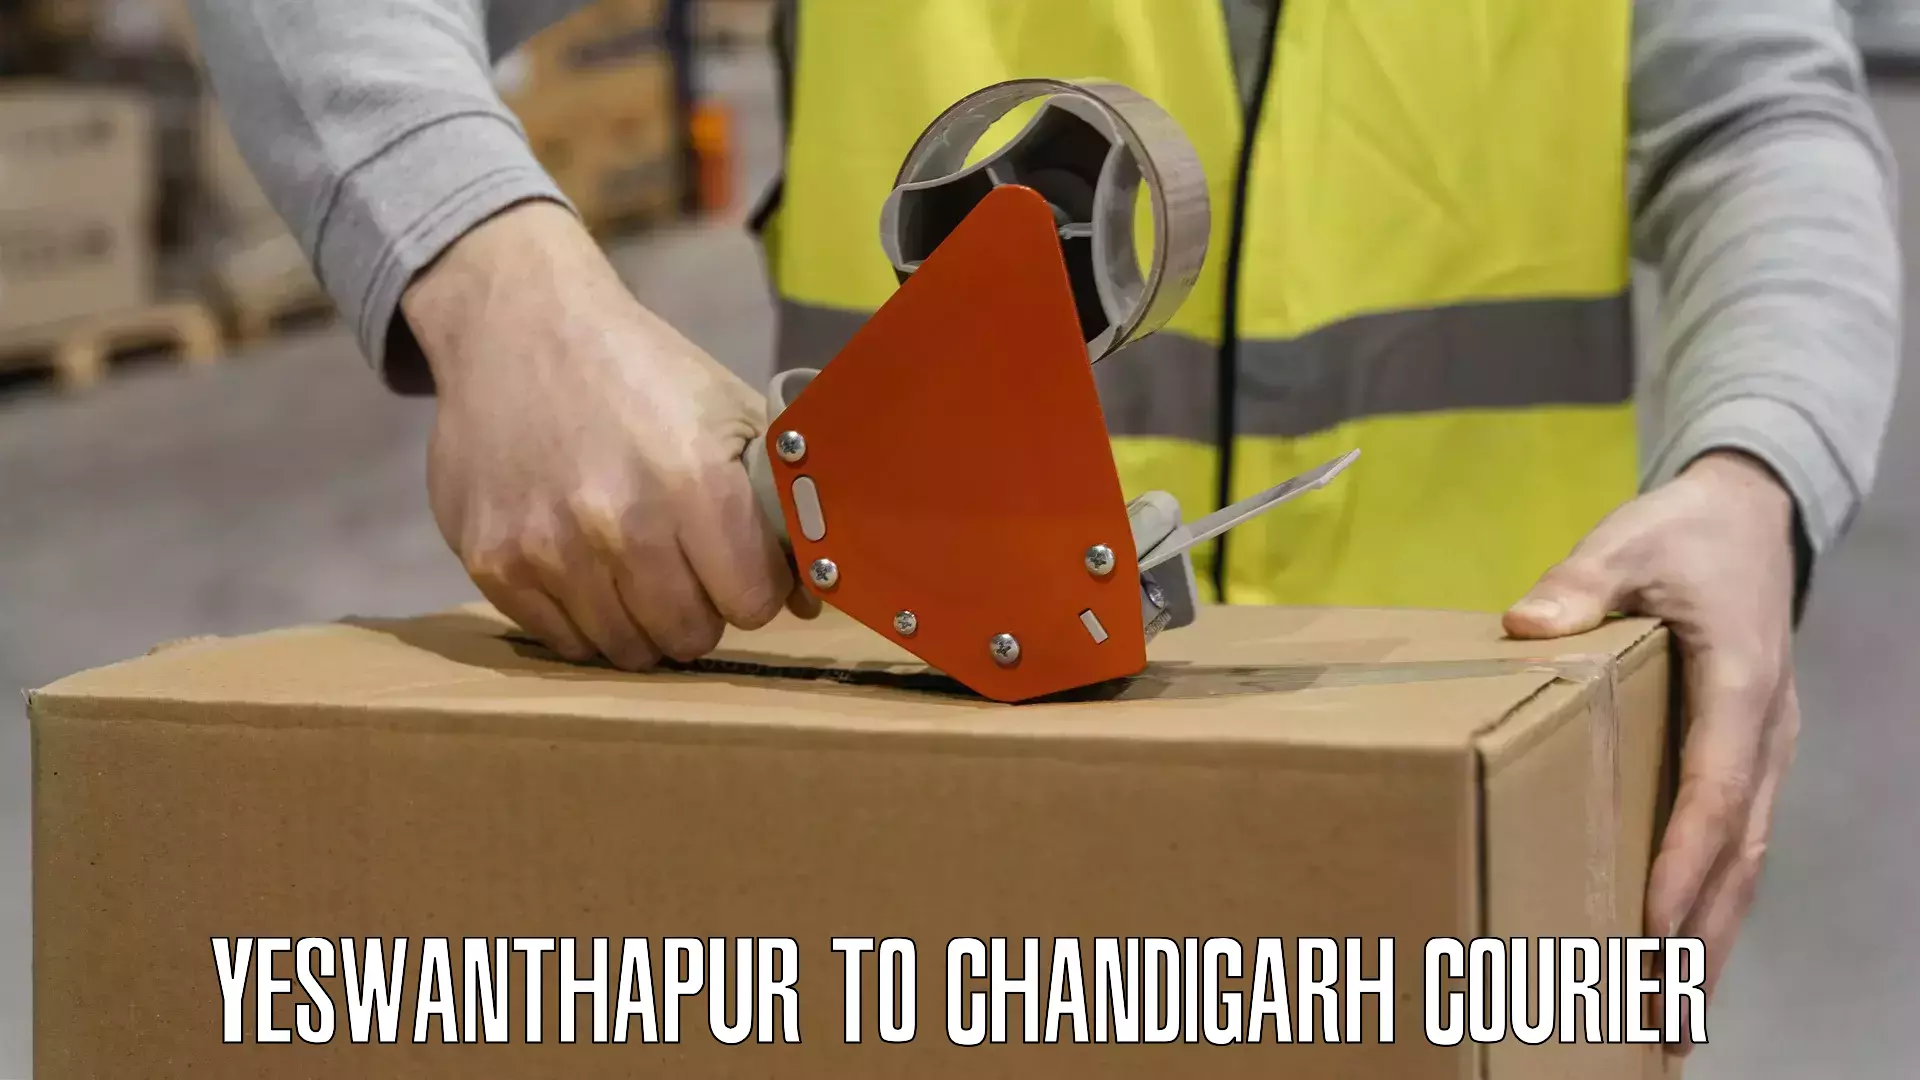 Expedited shipping methods Yeswanthapur to Chandigarh